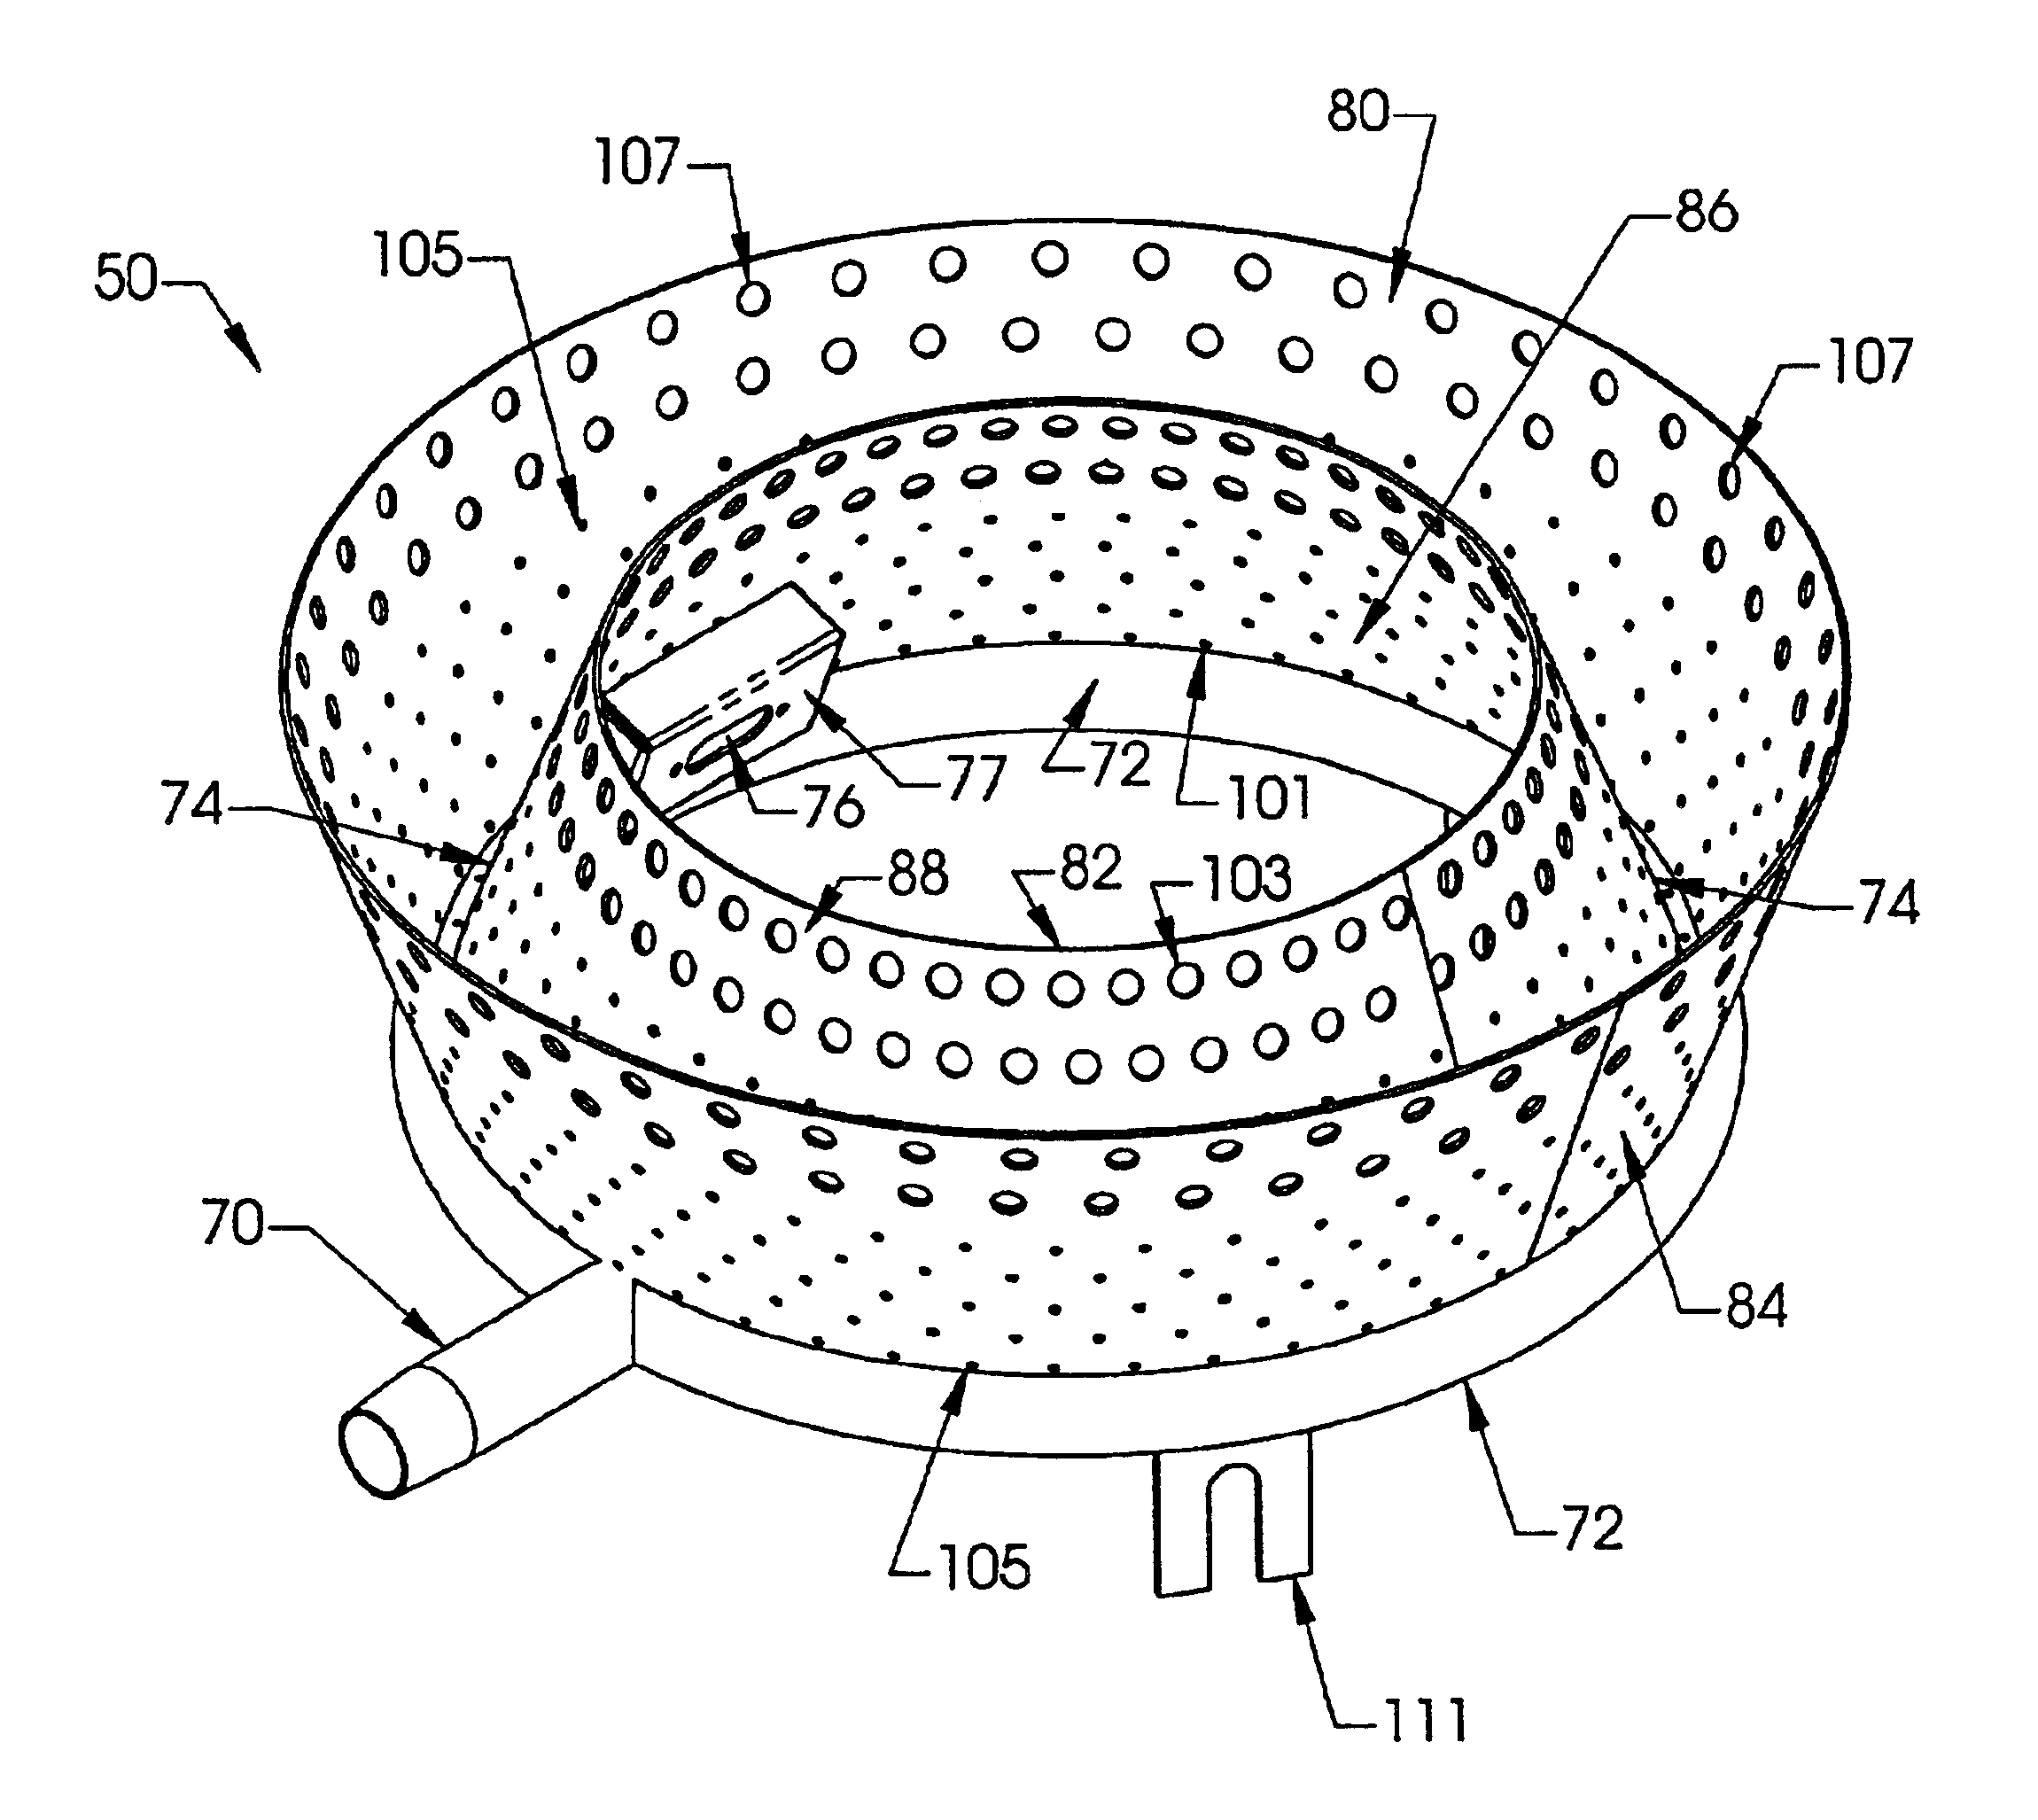 Combustion system for a heater